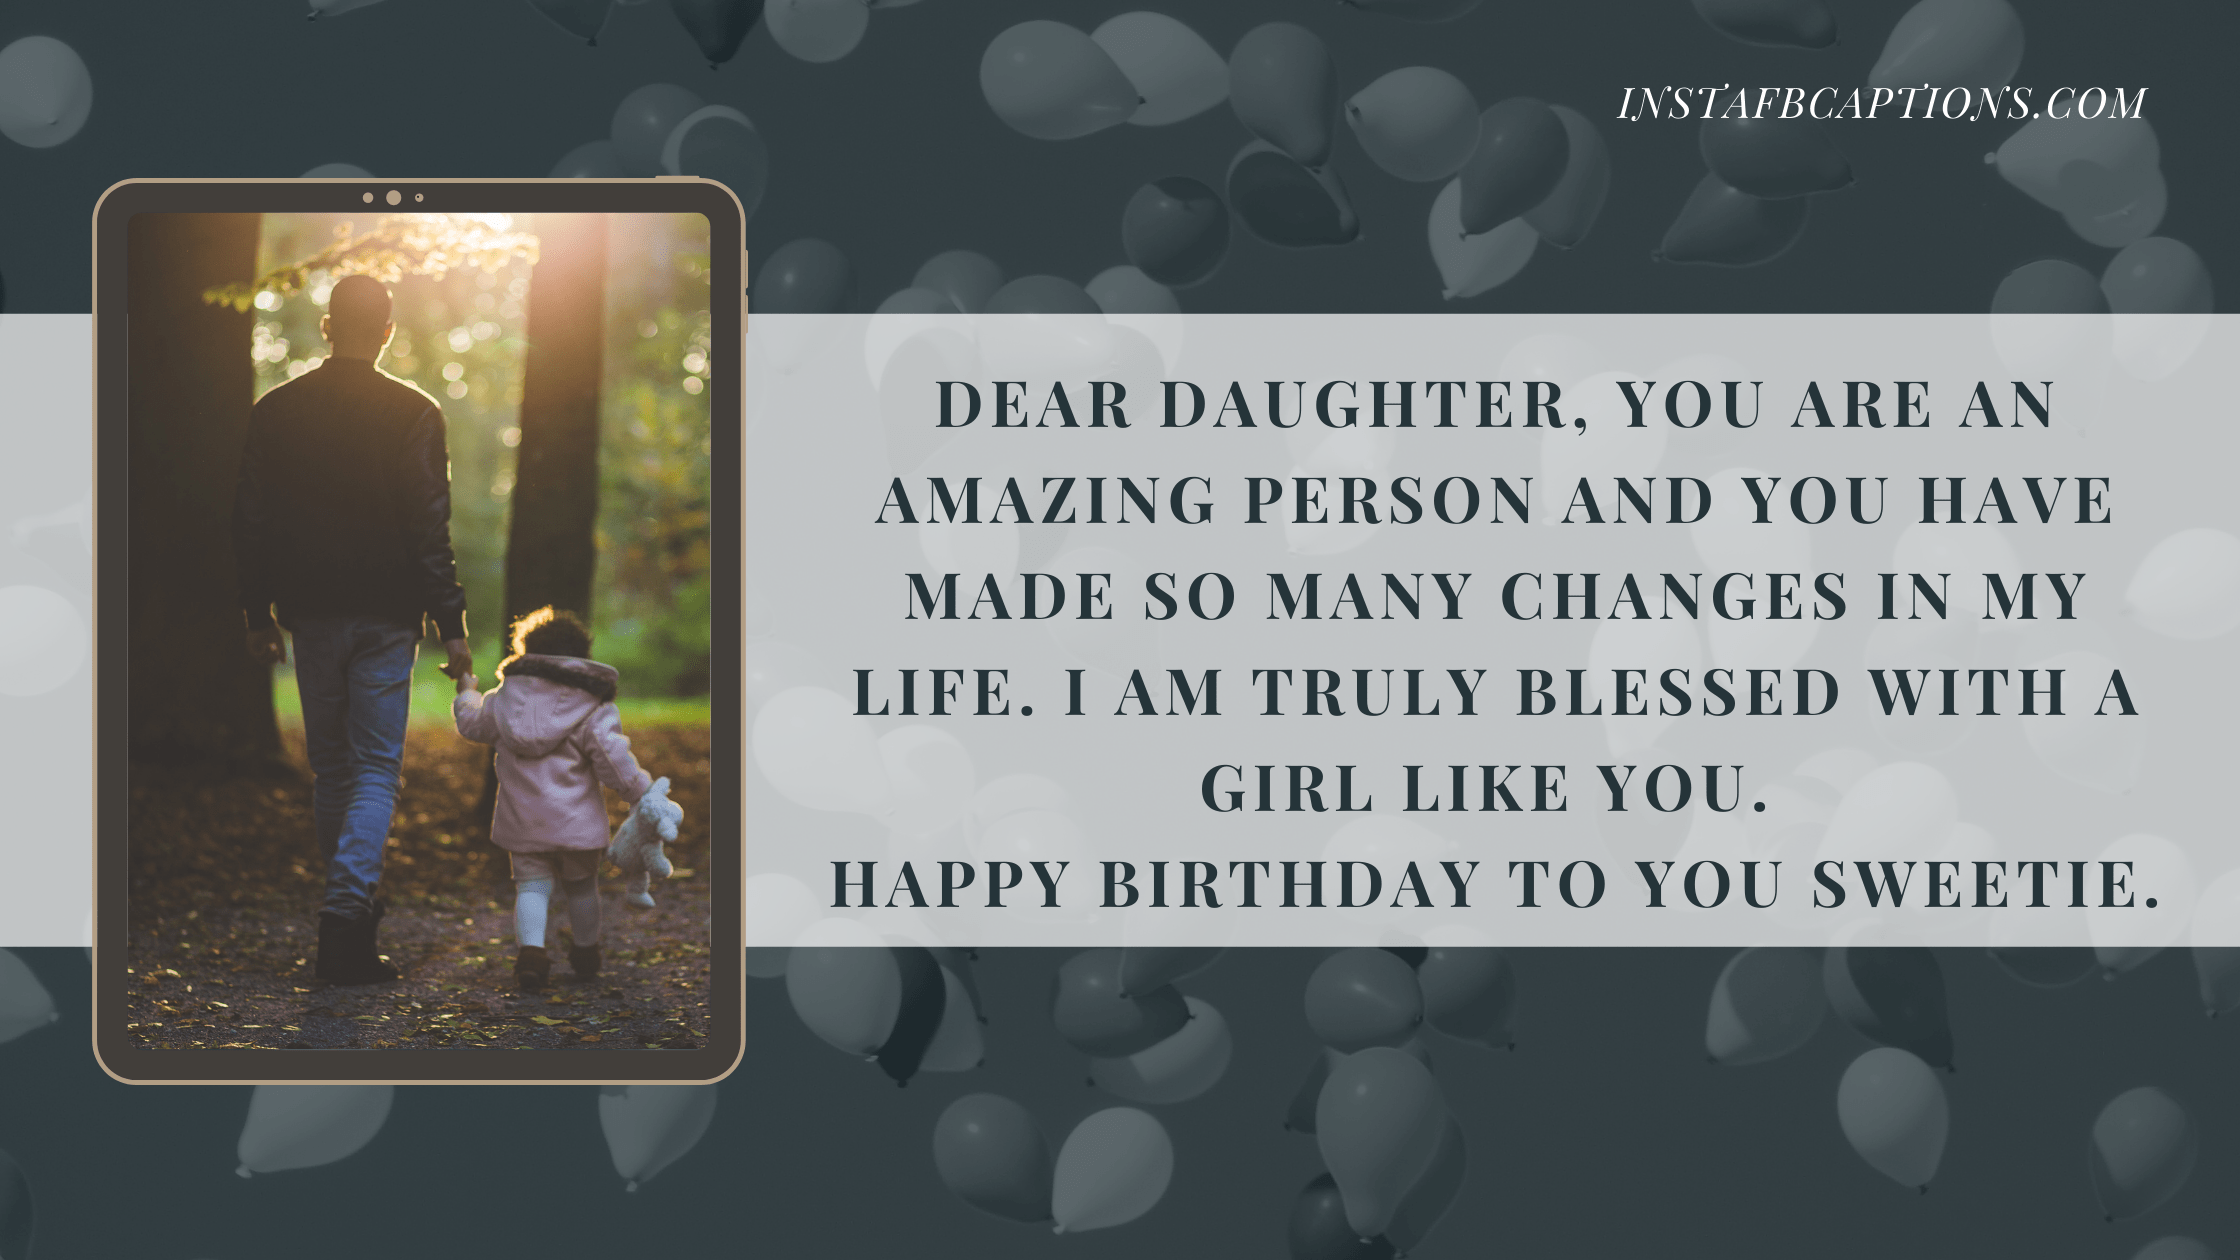 7th Birthday Wishes For Daughter  - 7th Birthday Wishes for Daughter - 7th Birthday Instagram Captions in 2022